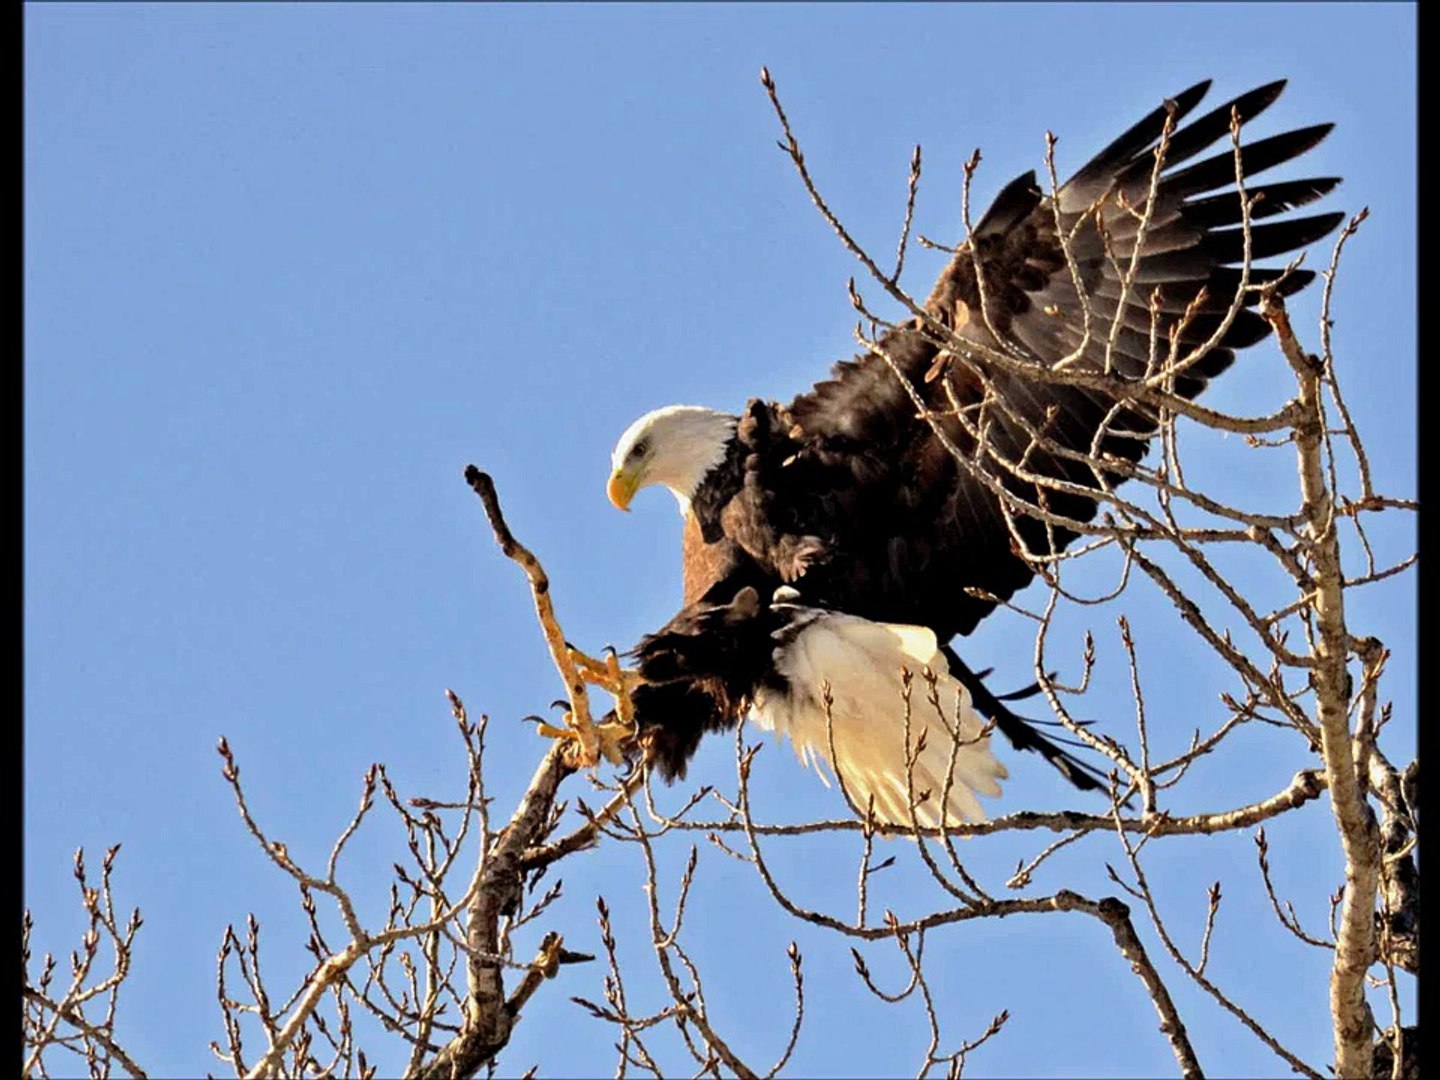 Bald Eagle catches a fish on Rock River